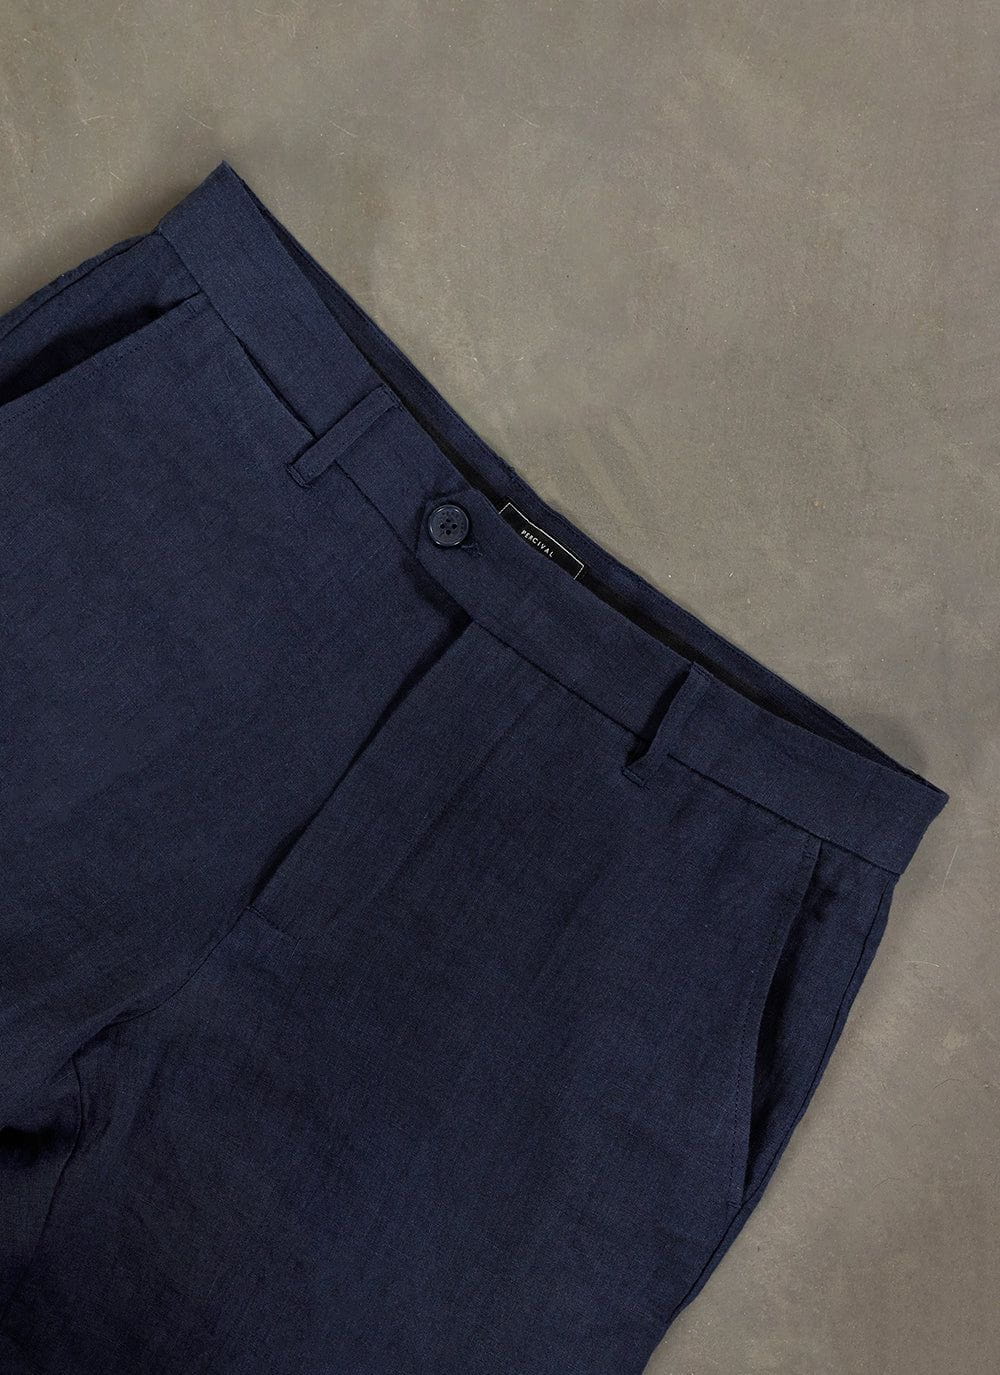 Acne Studios - Tailored wool blend trousers - Navy blue